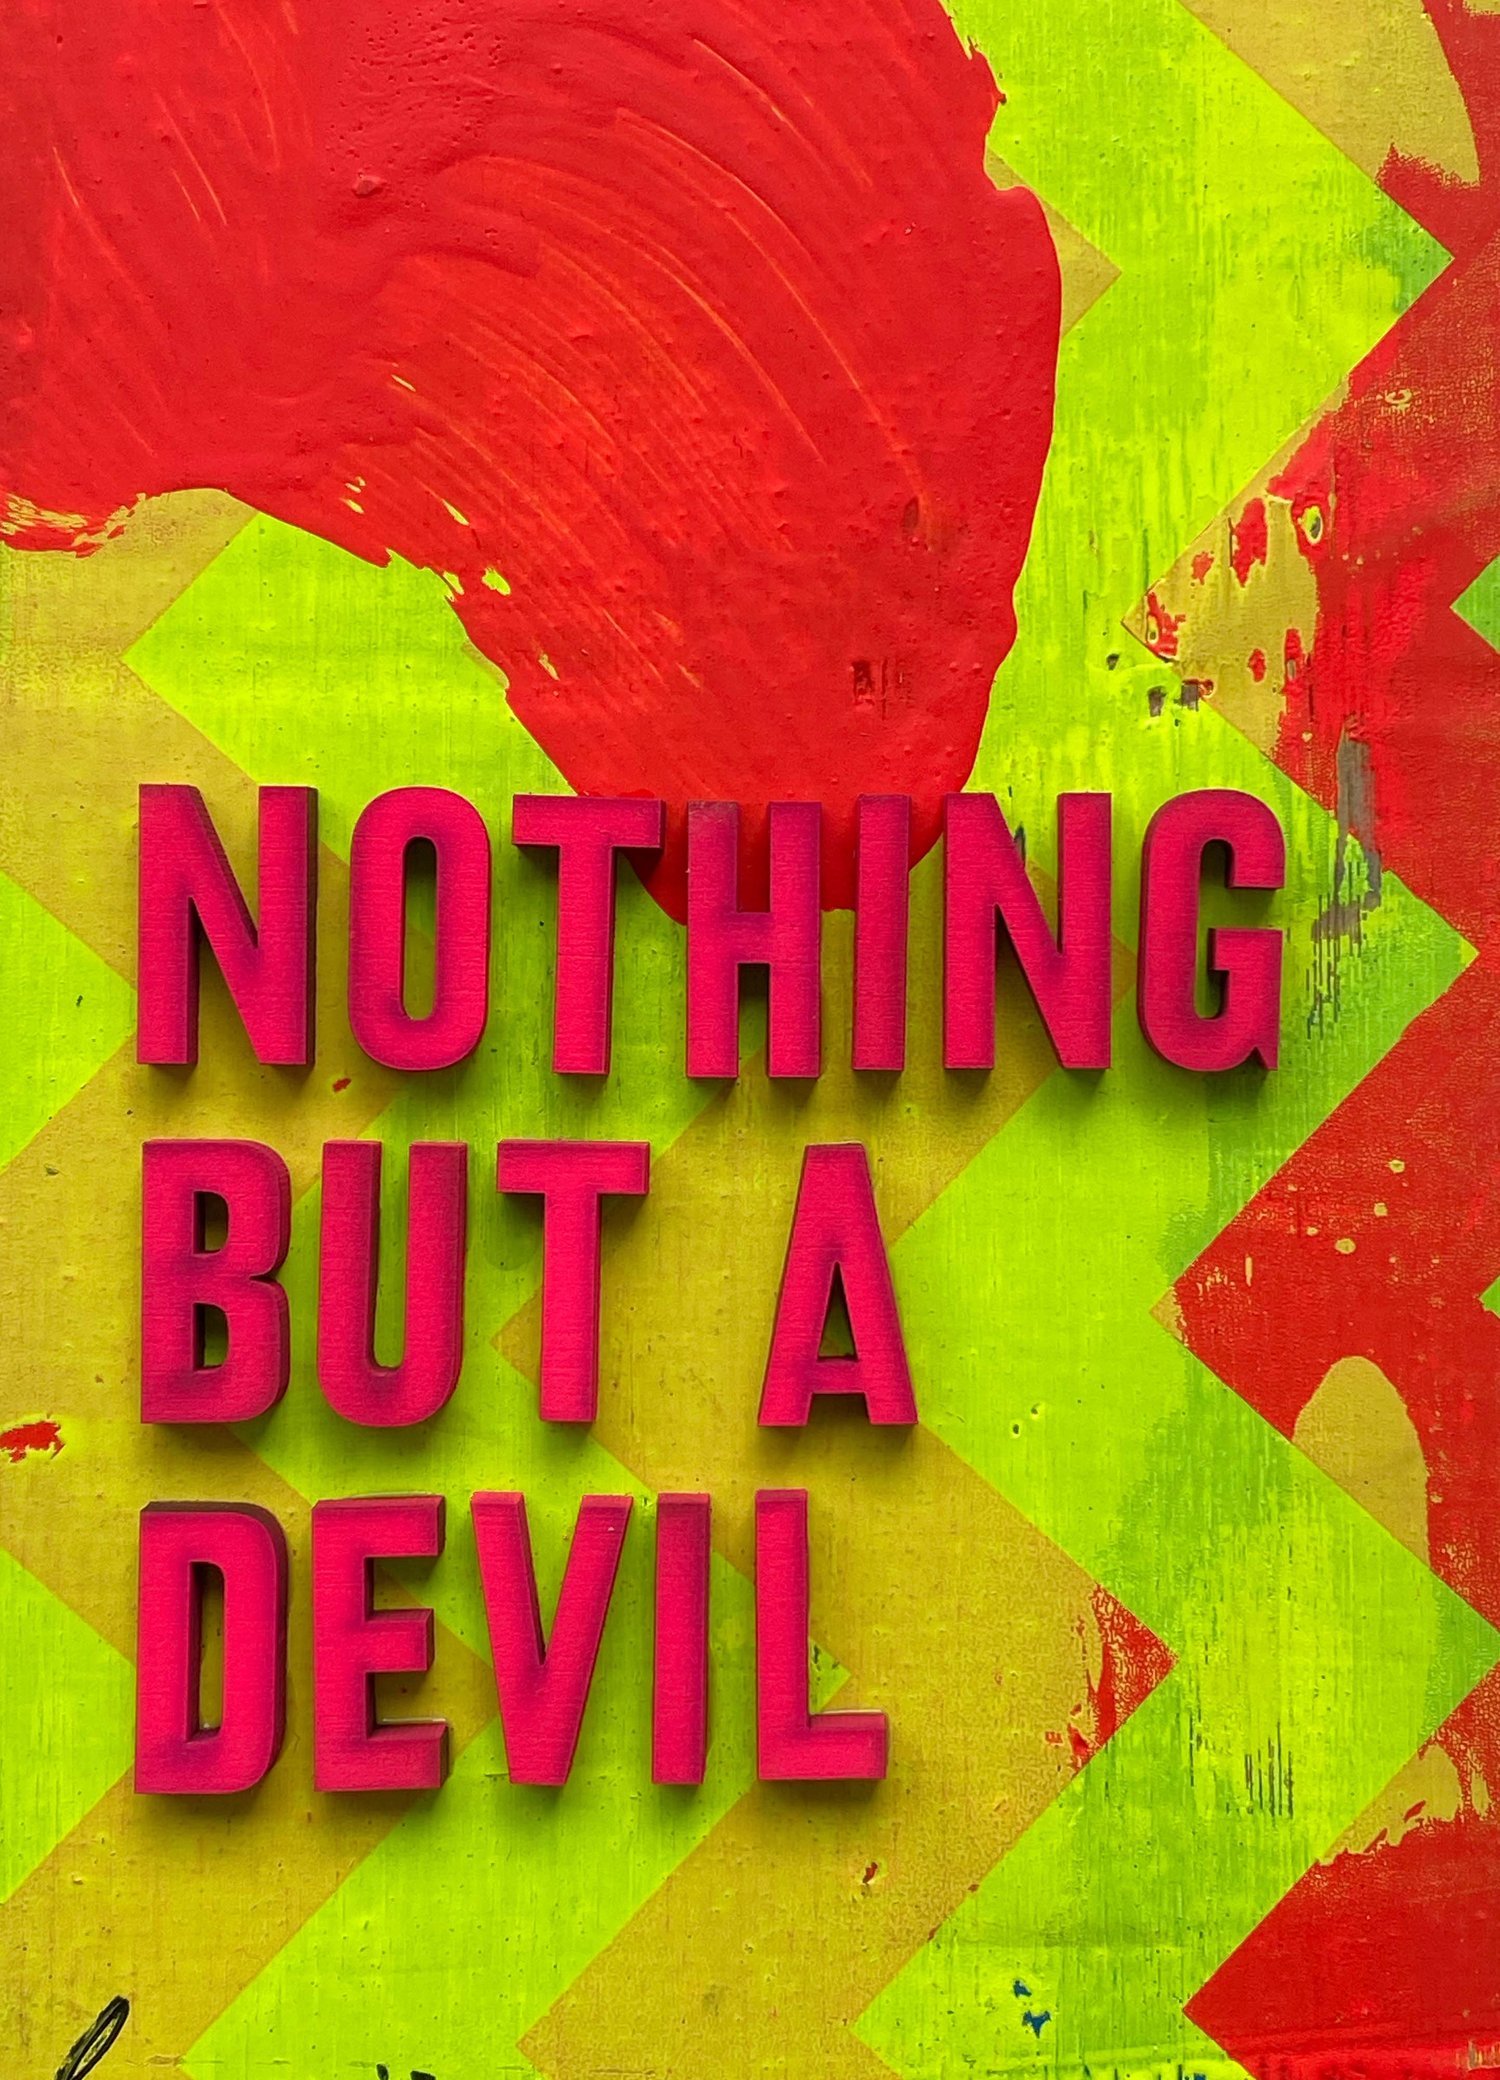 Image of 'Nothing but a Devil' by Hackney Dave